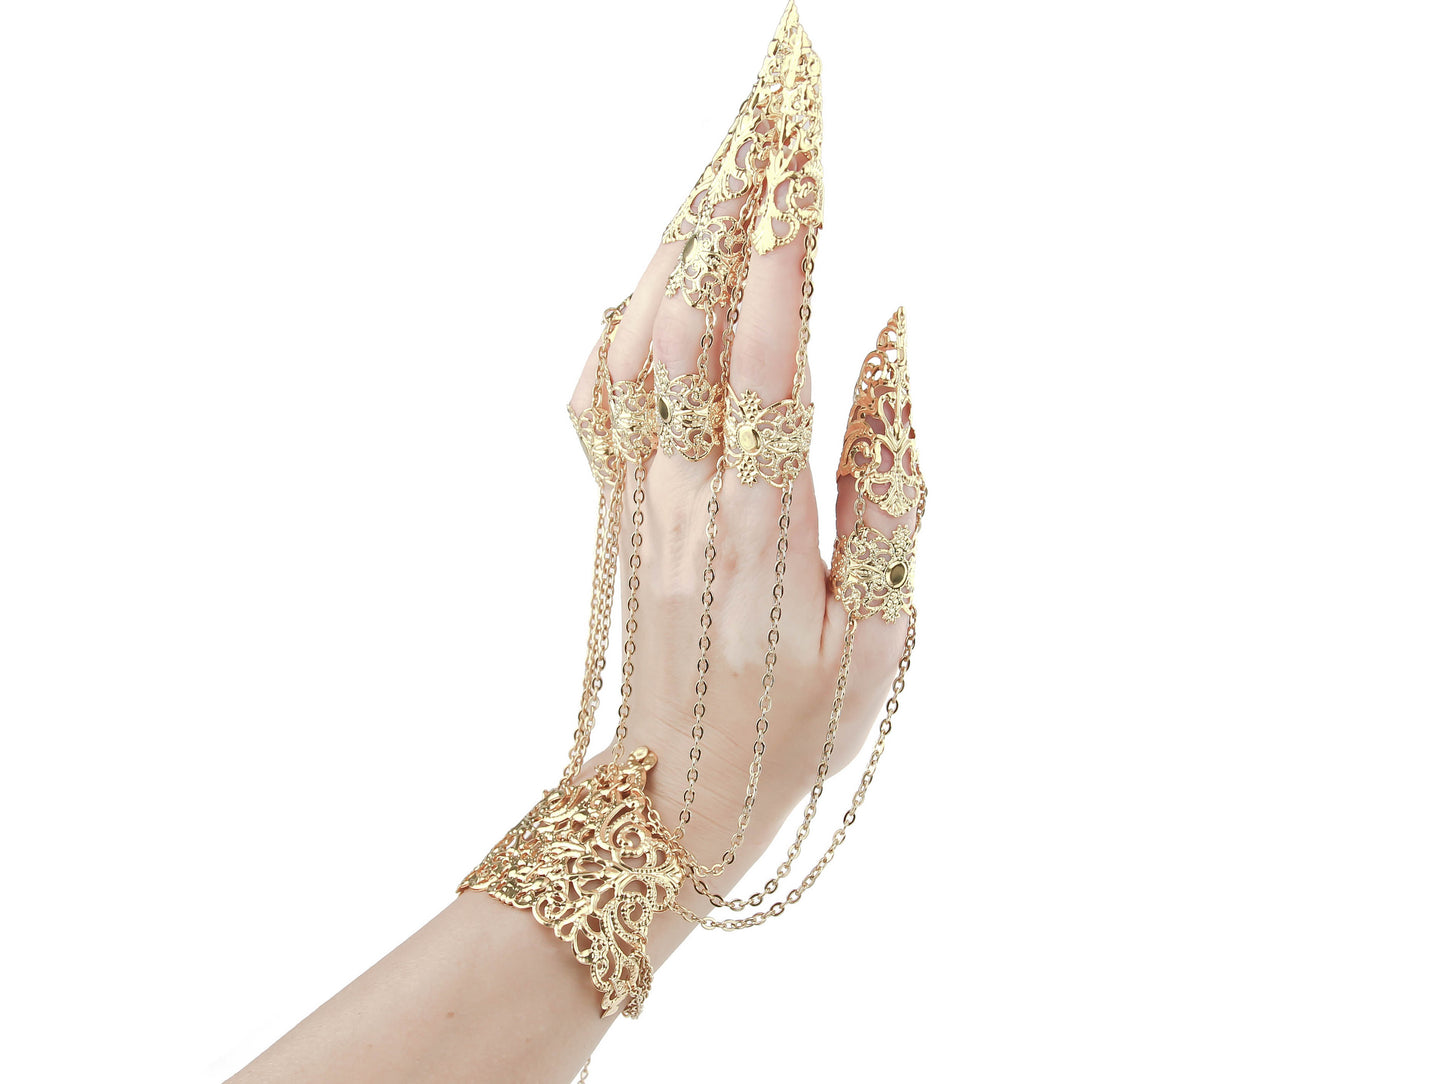 A captivating gold metal glove with finger claw rings from Myril Jewels, combining gothic-chic with neo-goth design. Ideal for Halloween, this unique piece makes a bold statement for witchcore lovers and is perfect for adding a daring touch to everyday wear or festival outfits.